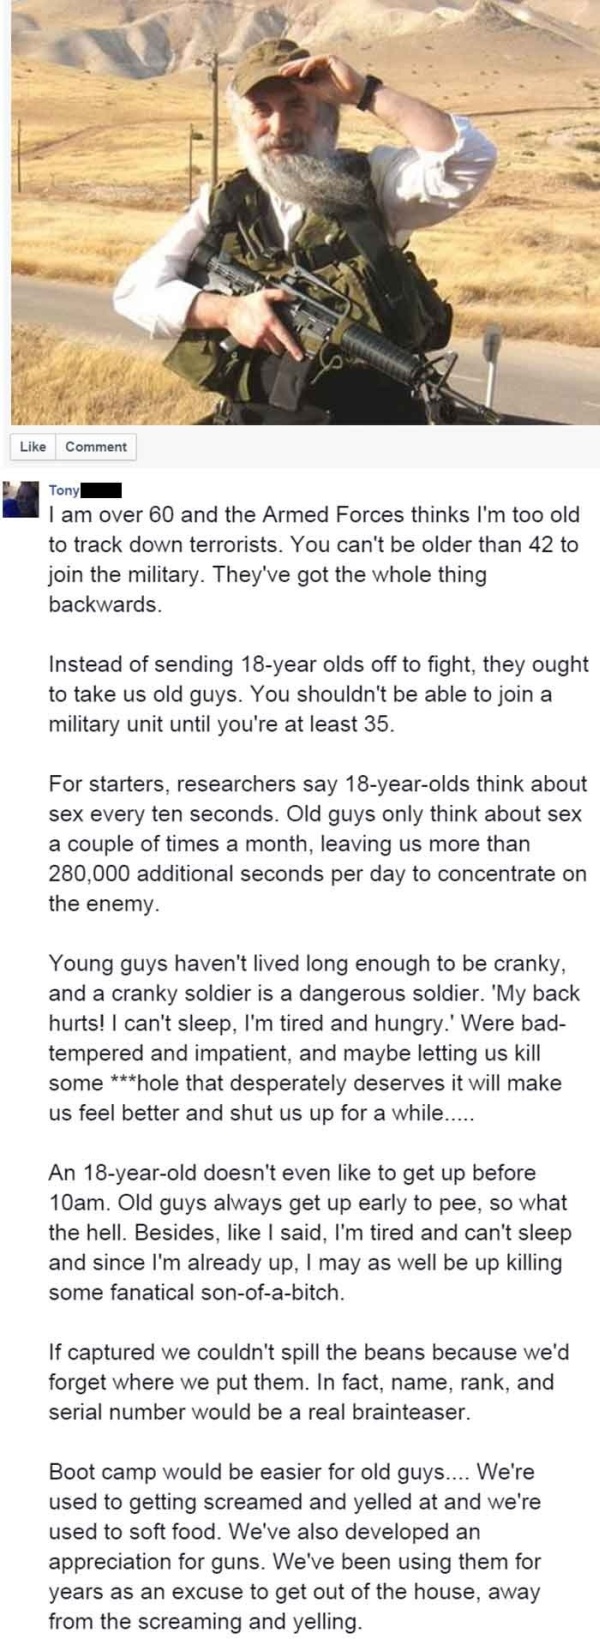 Senior Citizen On Why Old People Should Be Allowed To Join The Army (2 pics)